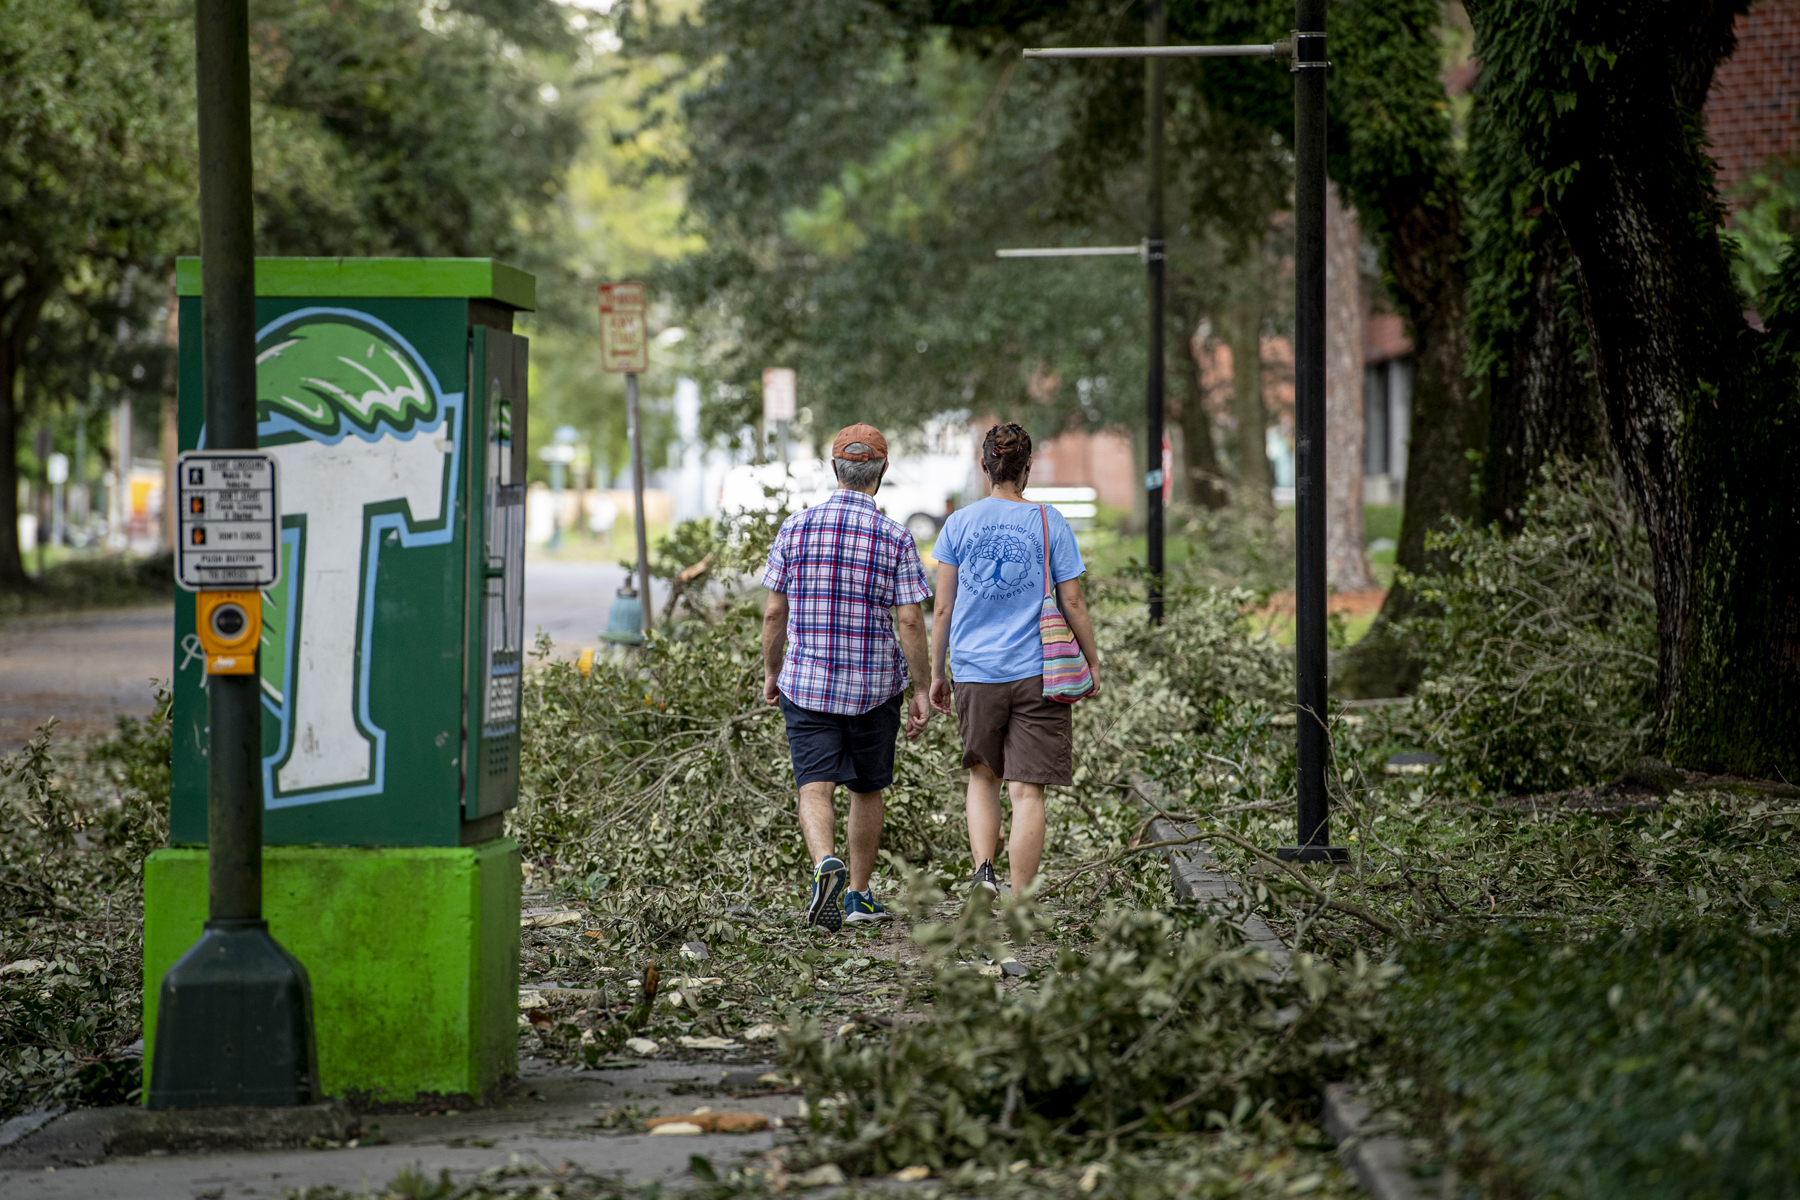 The Hurricane Ida Relief Assistance Fund was pulled together as a joint effort across the university to assist faculty and staff who had experienced damages and displacement due to the storm.